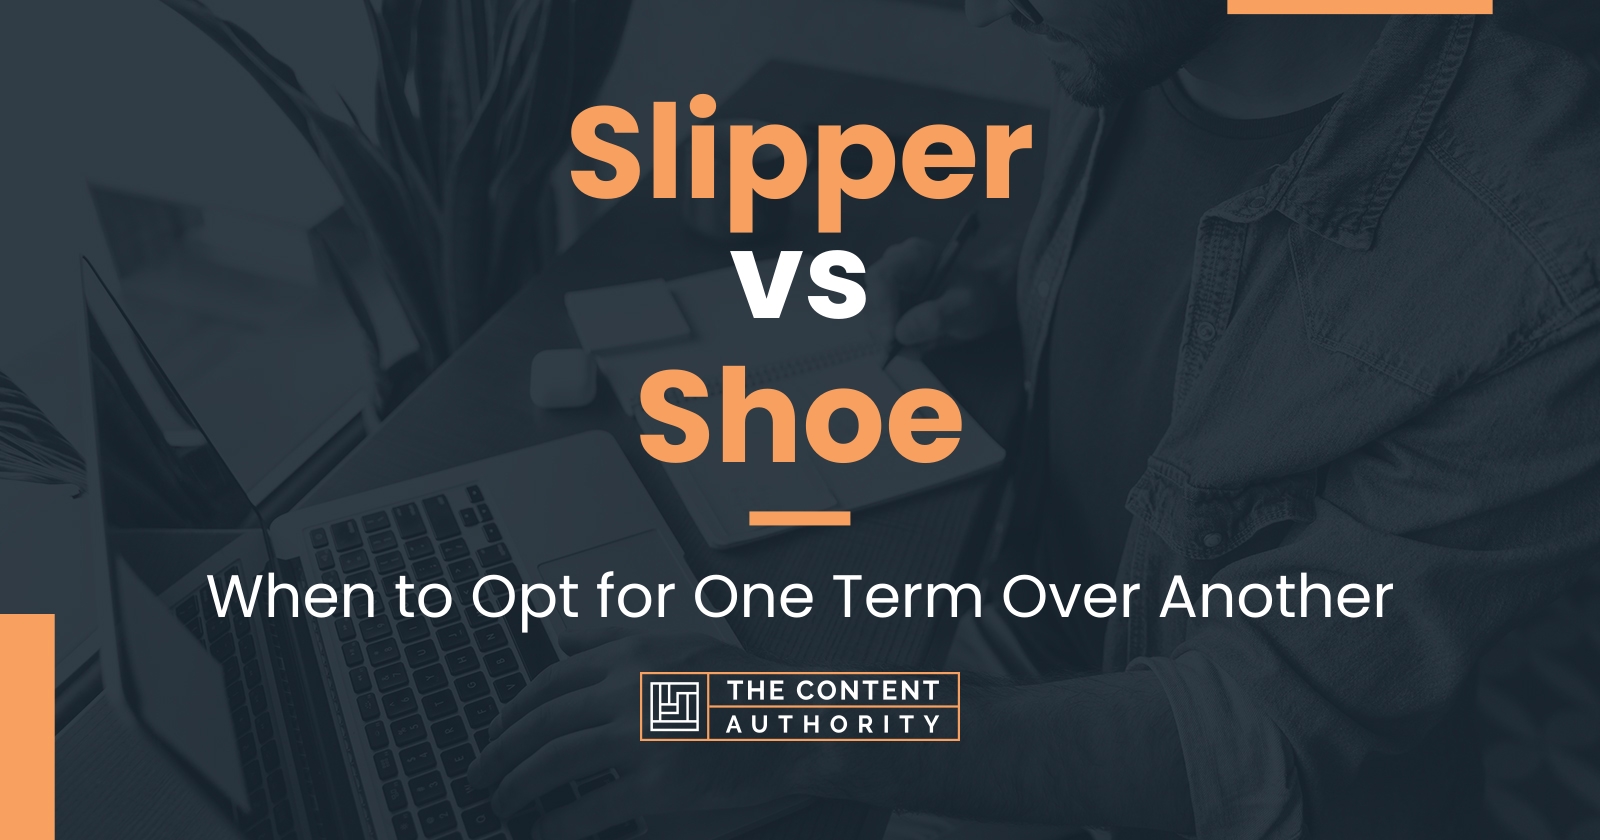 Slipper vs Shoe: When to Opt for One Term Over Another